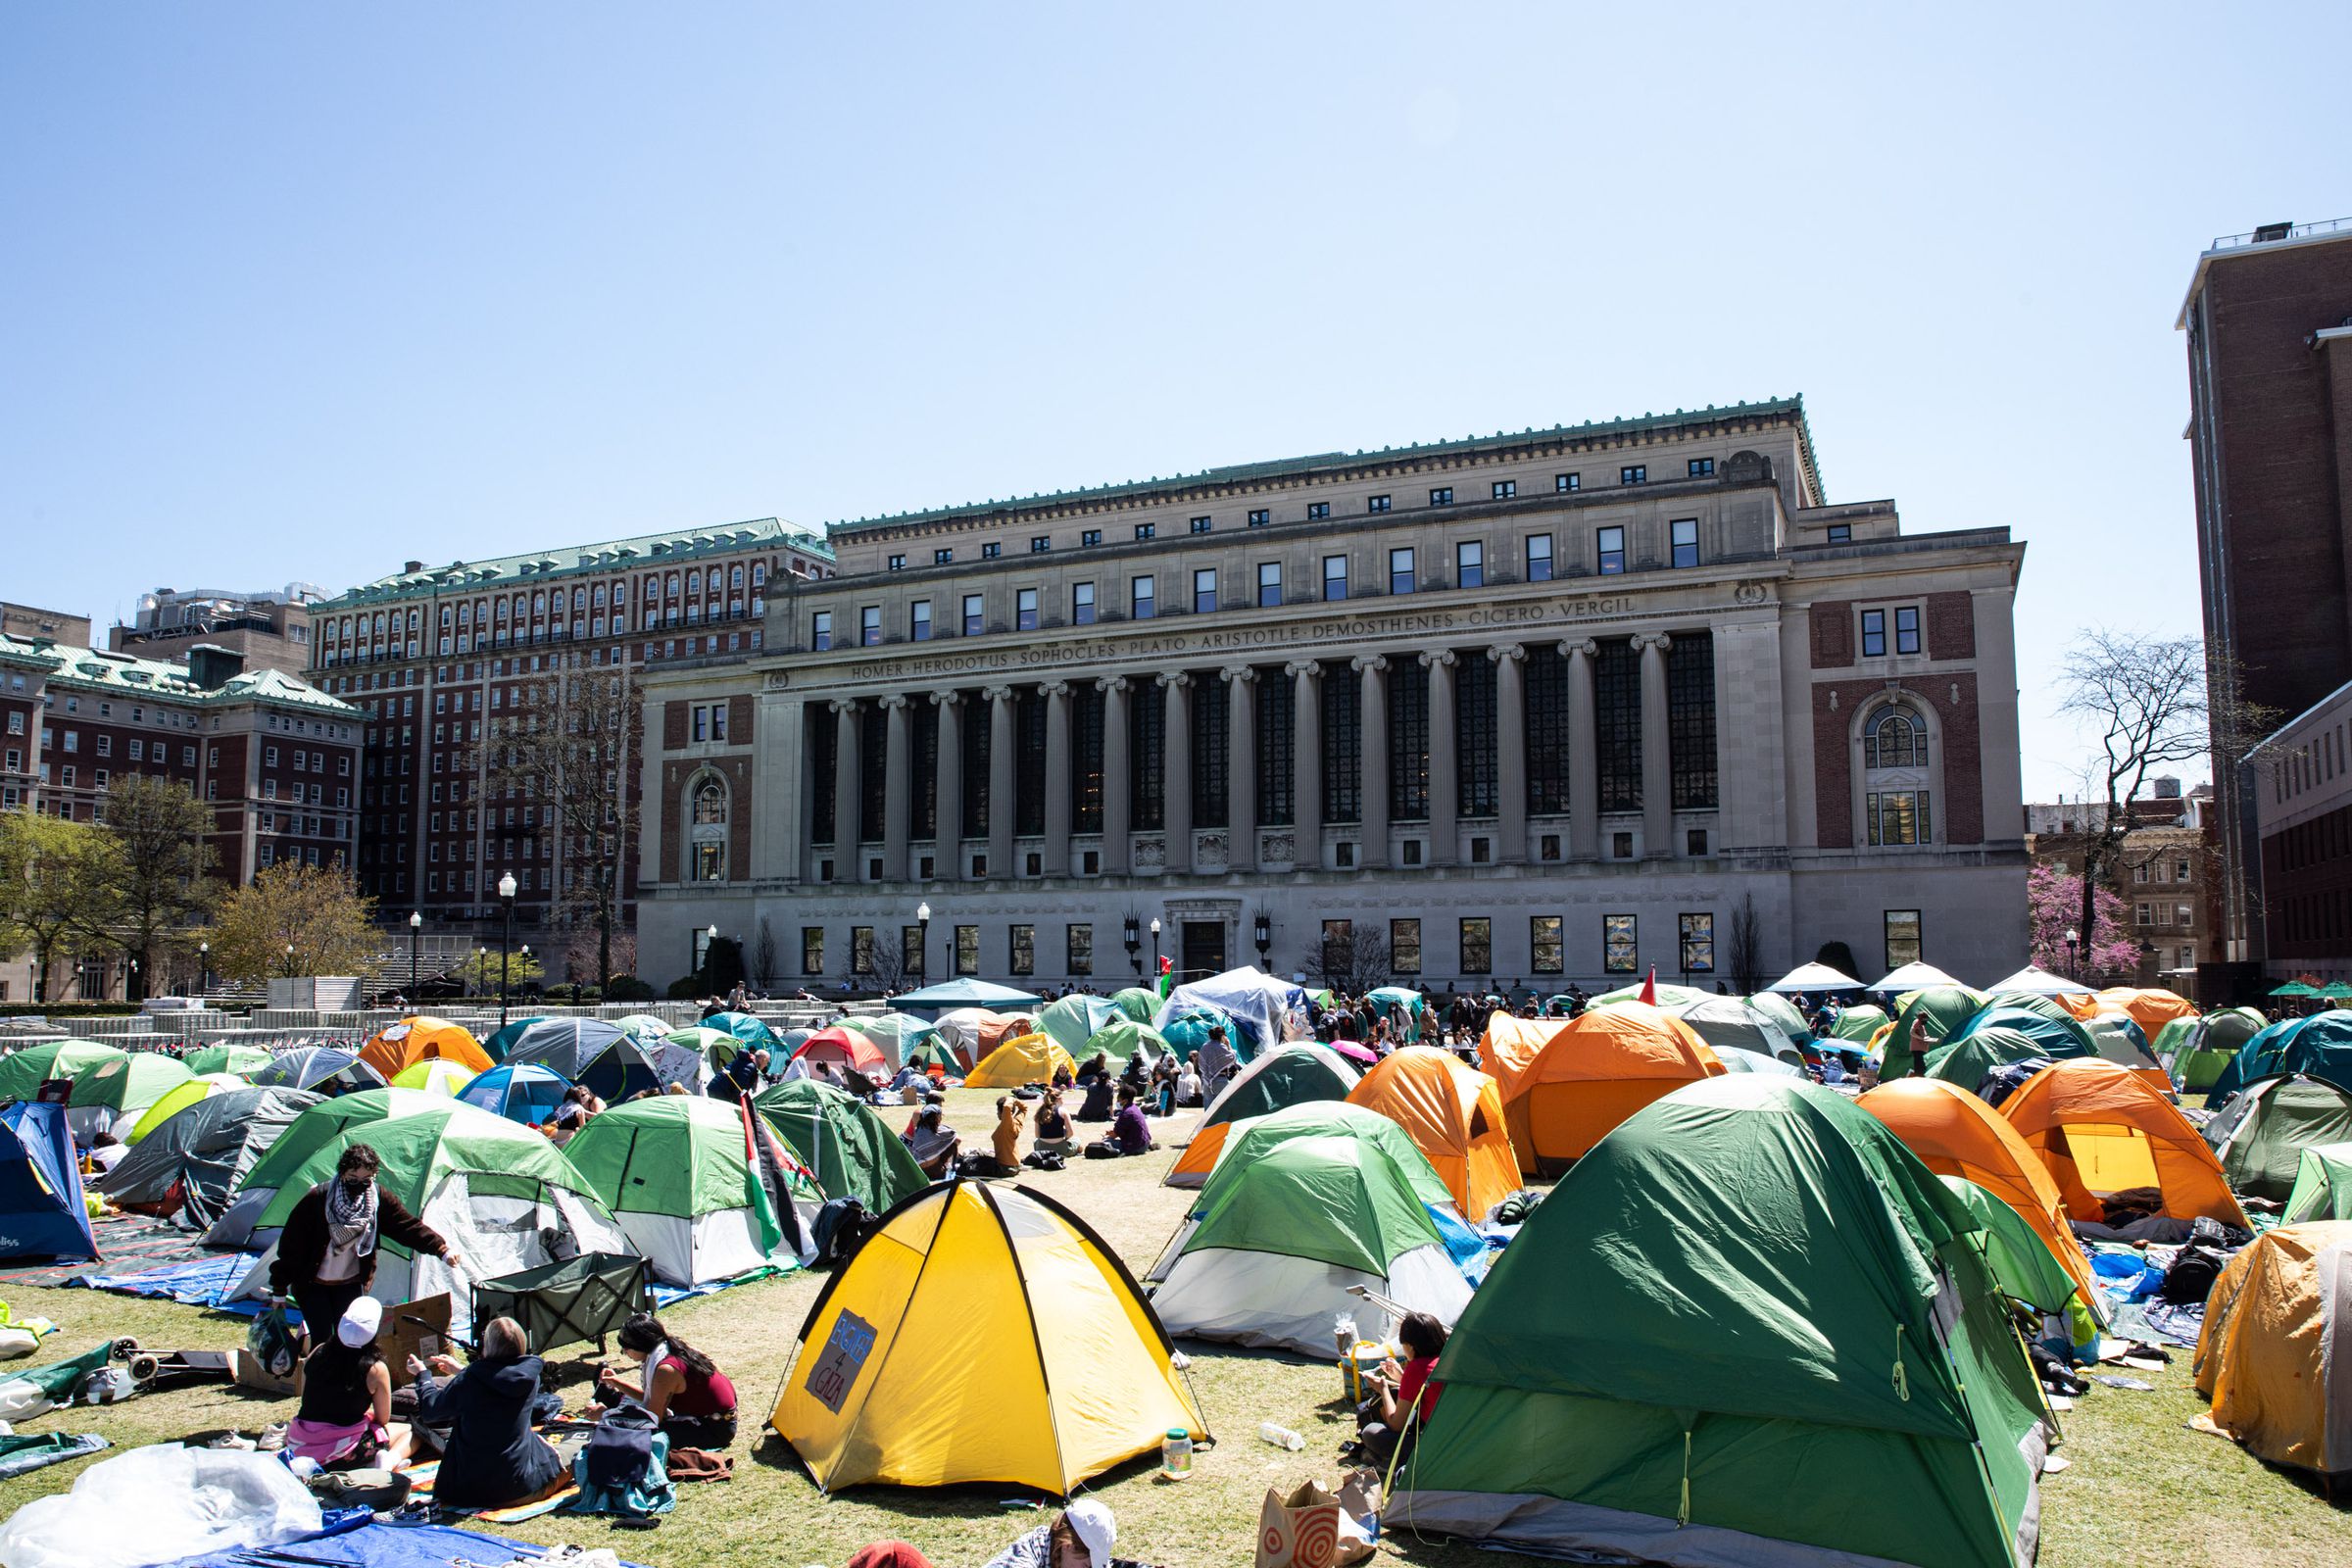 The tents of a student encampment at Columbia University spread out across the quad. The library, a building with neoclassical columns, looms in the background.